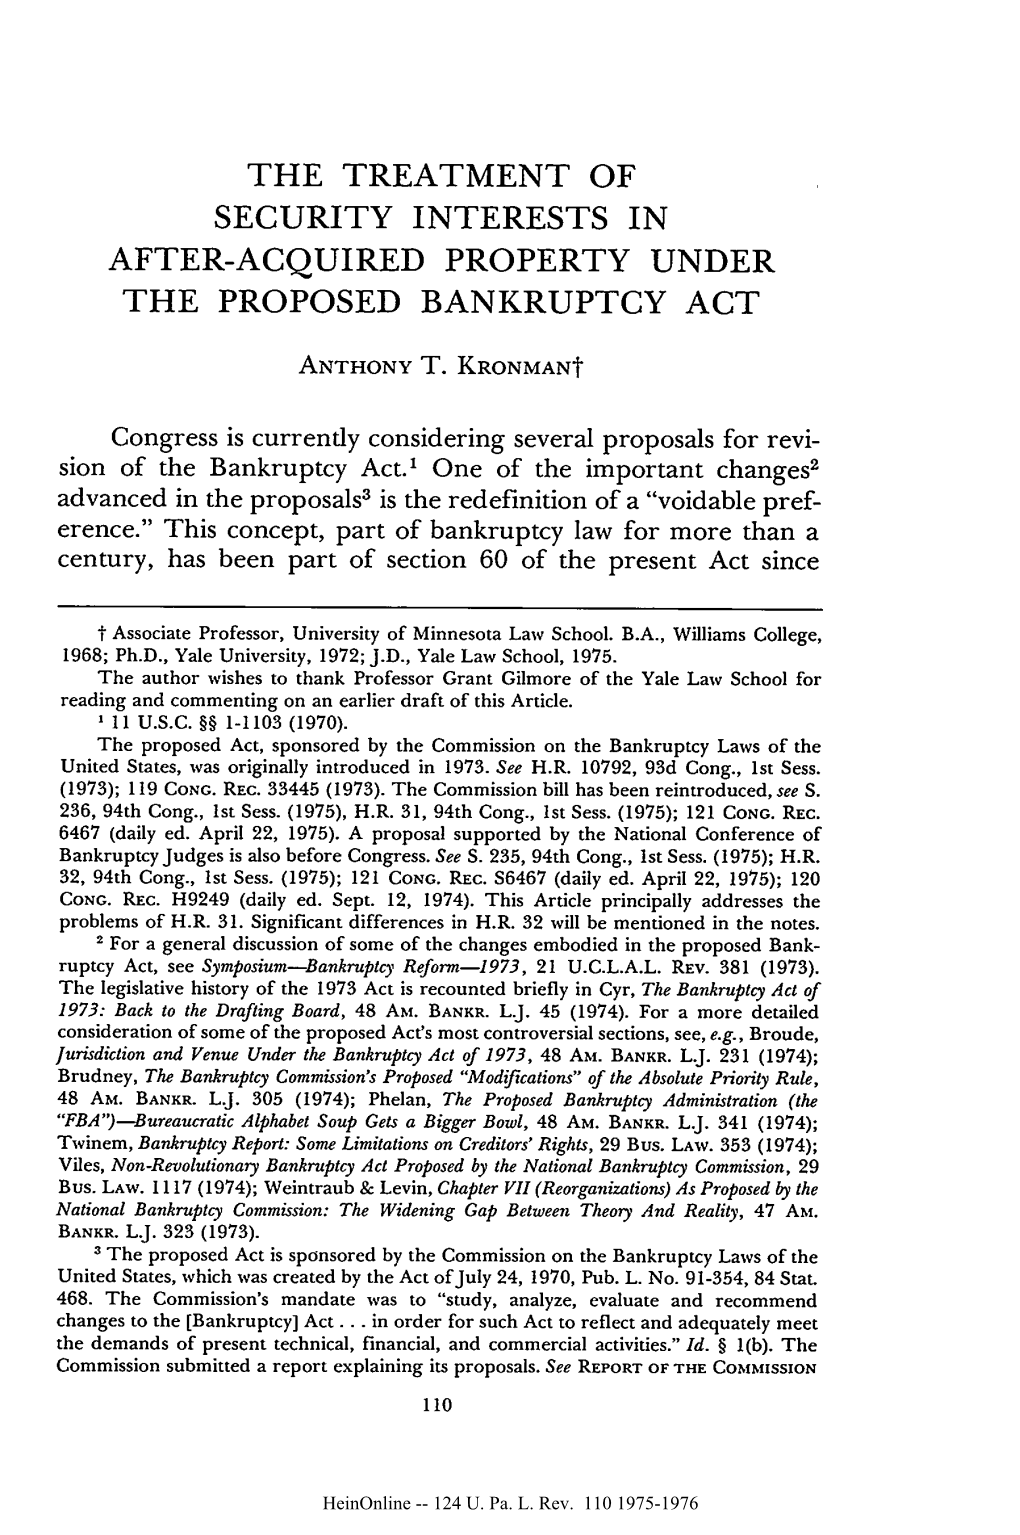 The Treatment of Security Interests in After-Acquired Property Under the Proposed Bankruptcy Act